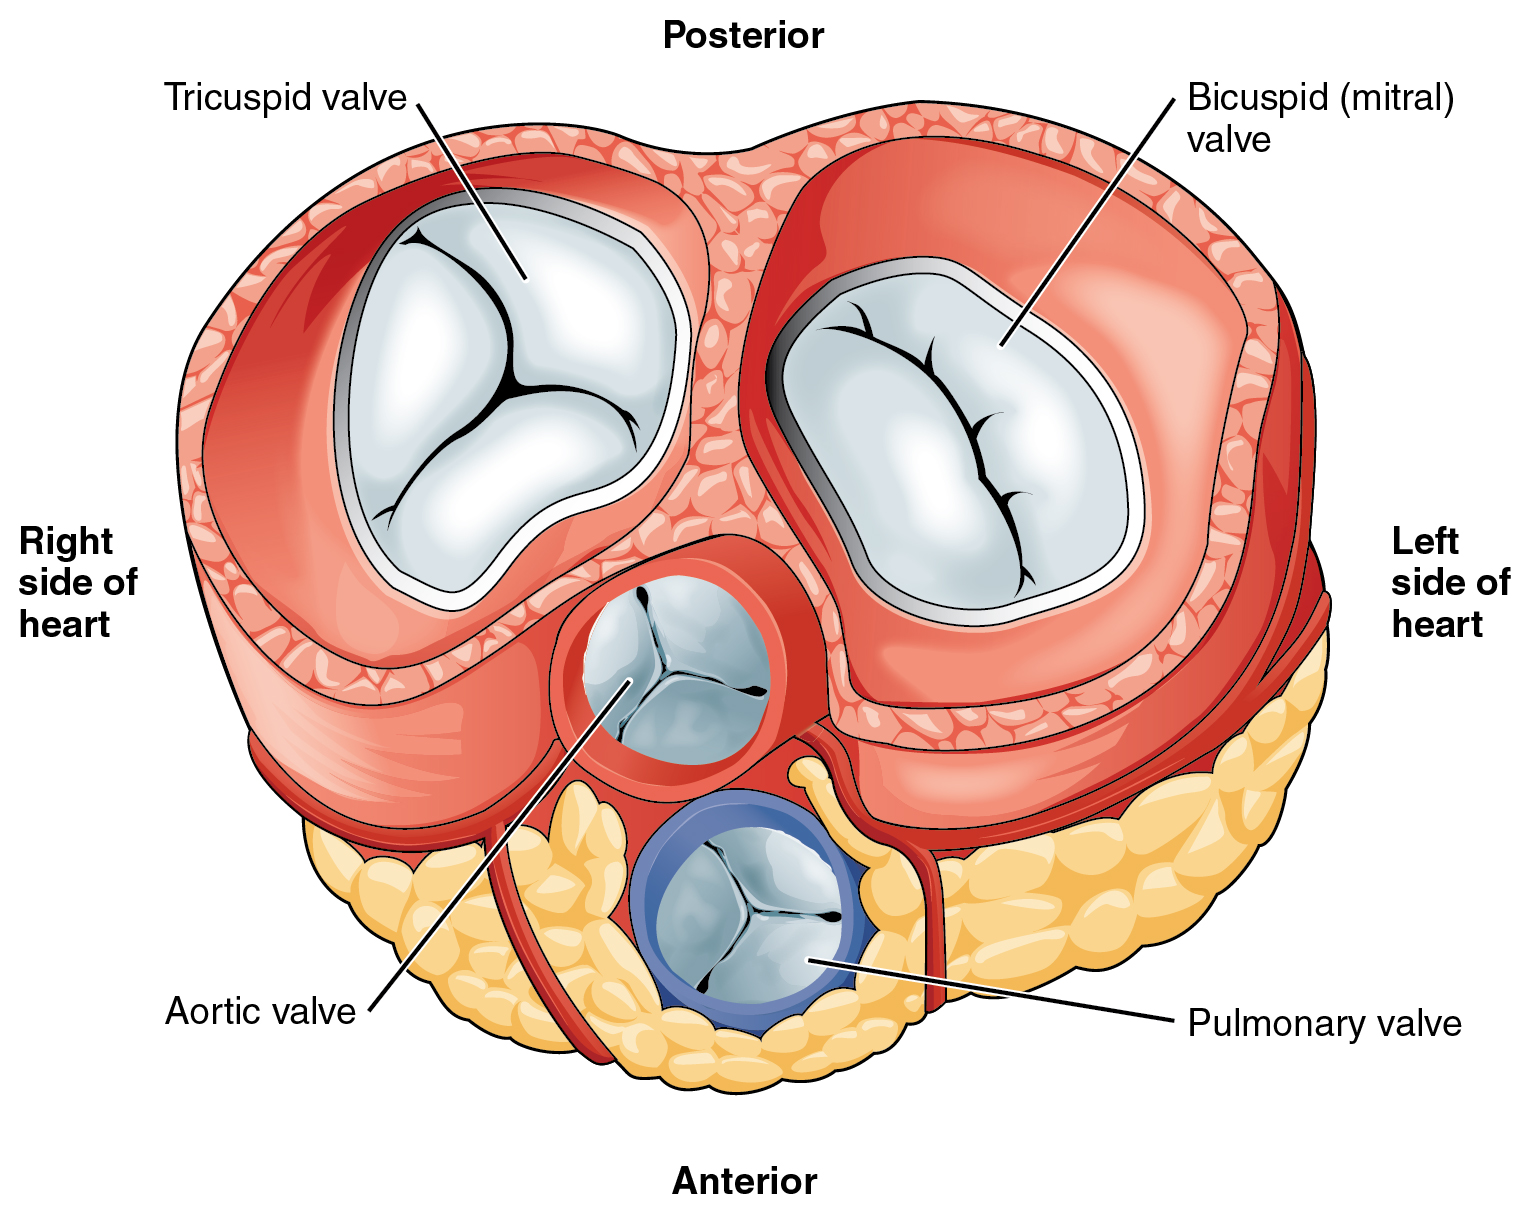 This diagram shows the anterior view of the heart with the different heart valves labeled.